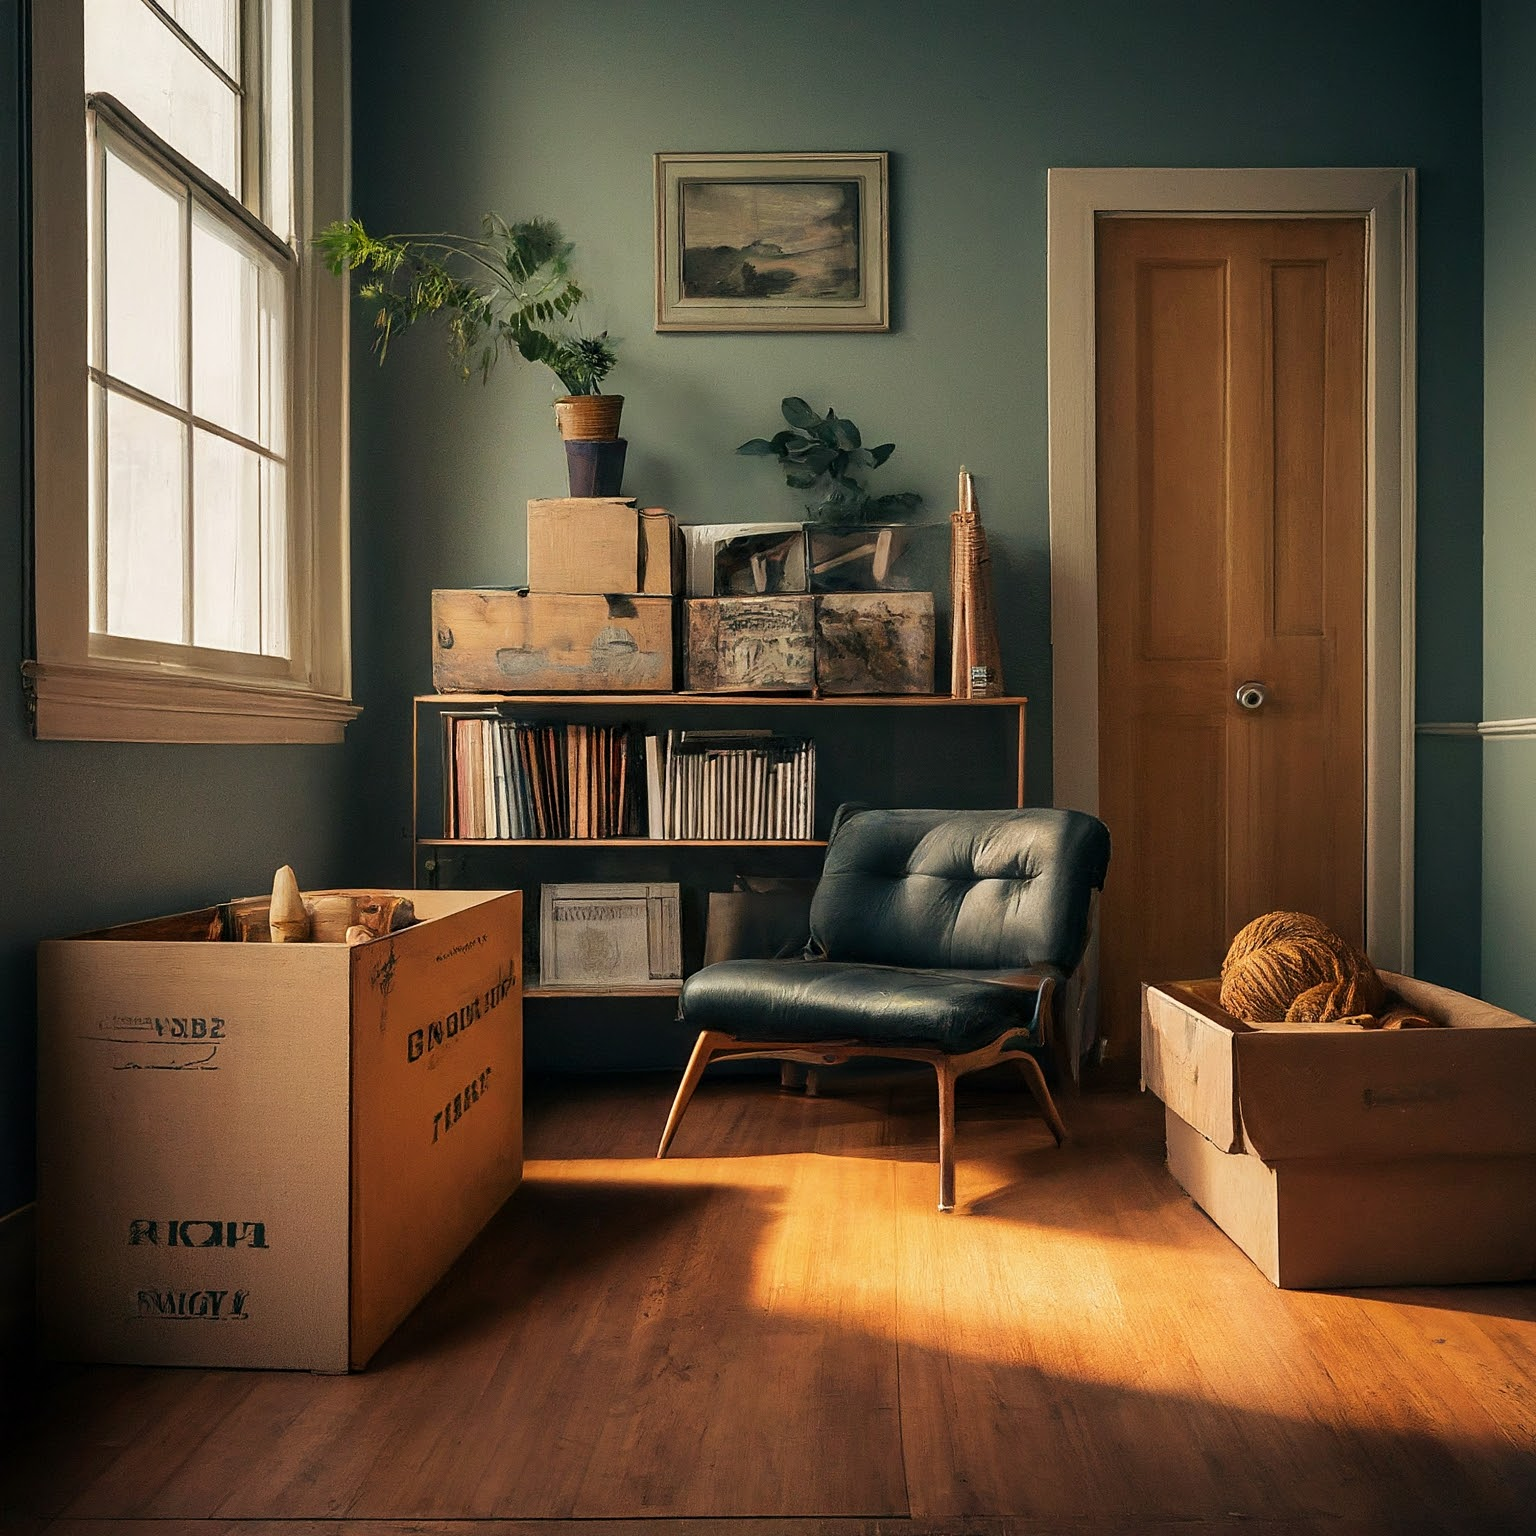 Show a neat and tidy room with boxes that were sorted by keep, discard, donate